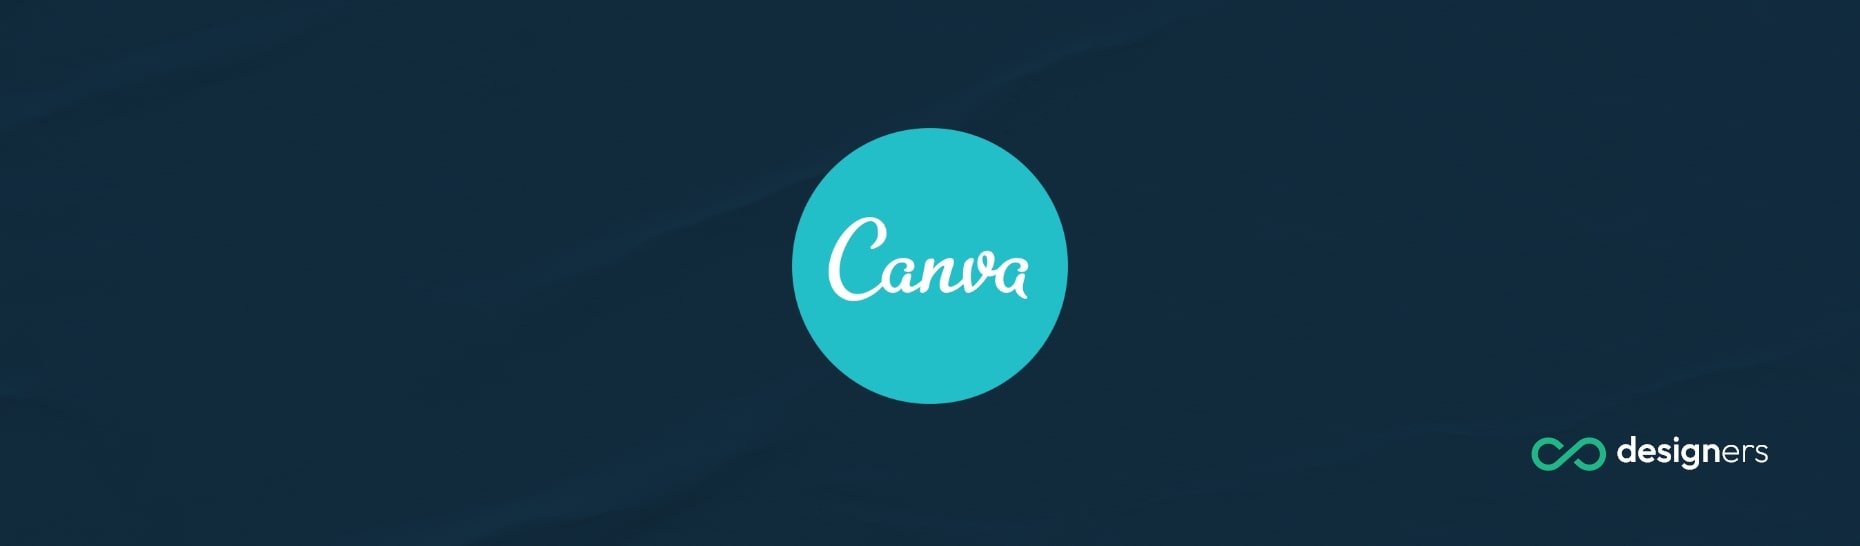 What Is the Star Wars Font Called in Canva?